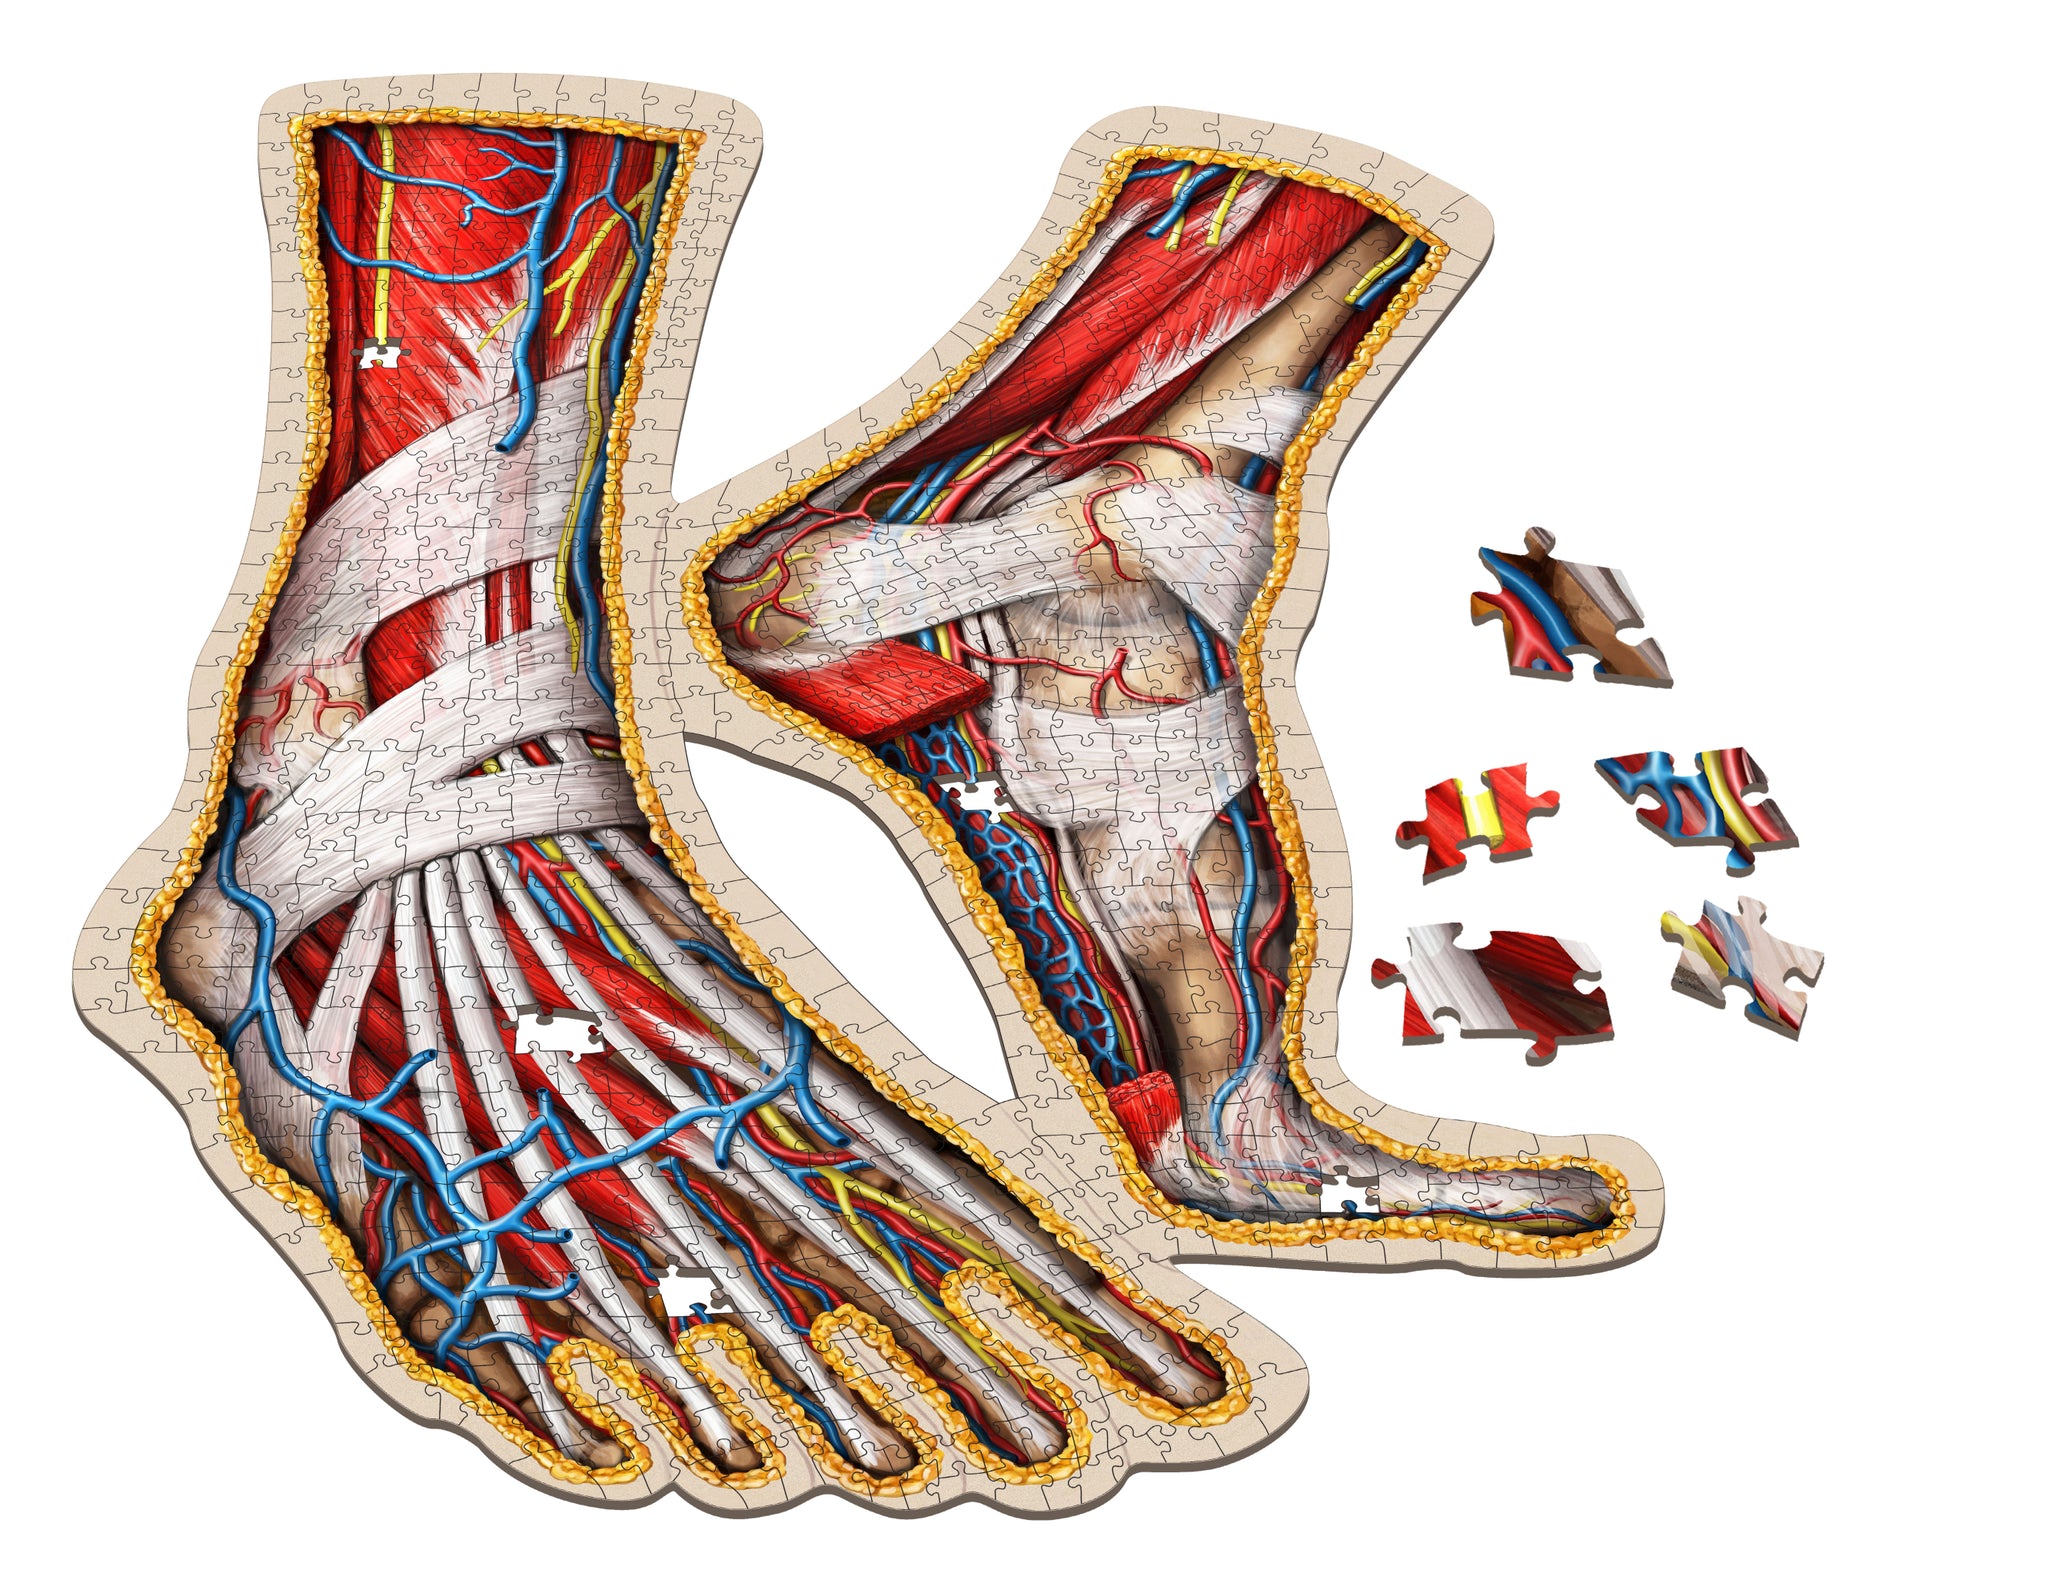 Human Feet Anatomy Jigsaw Puzzle | Dr. Livingston's Unique Shaped Science Puzzles